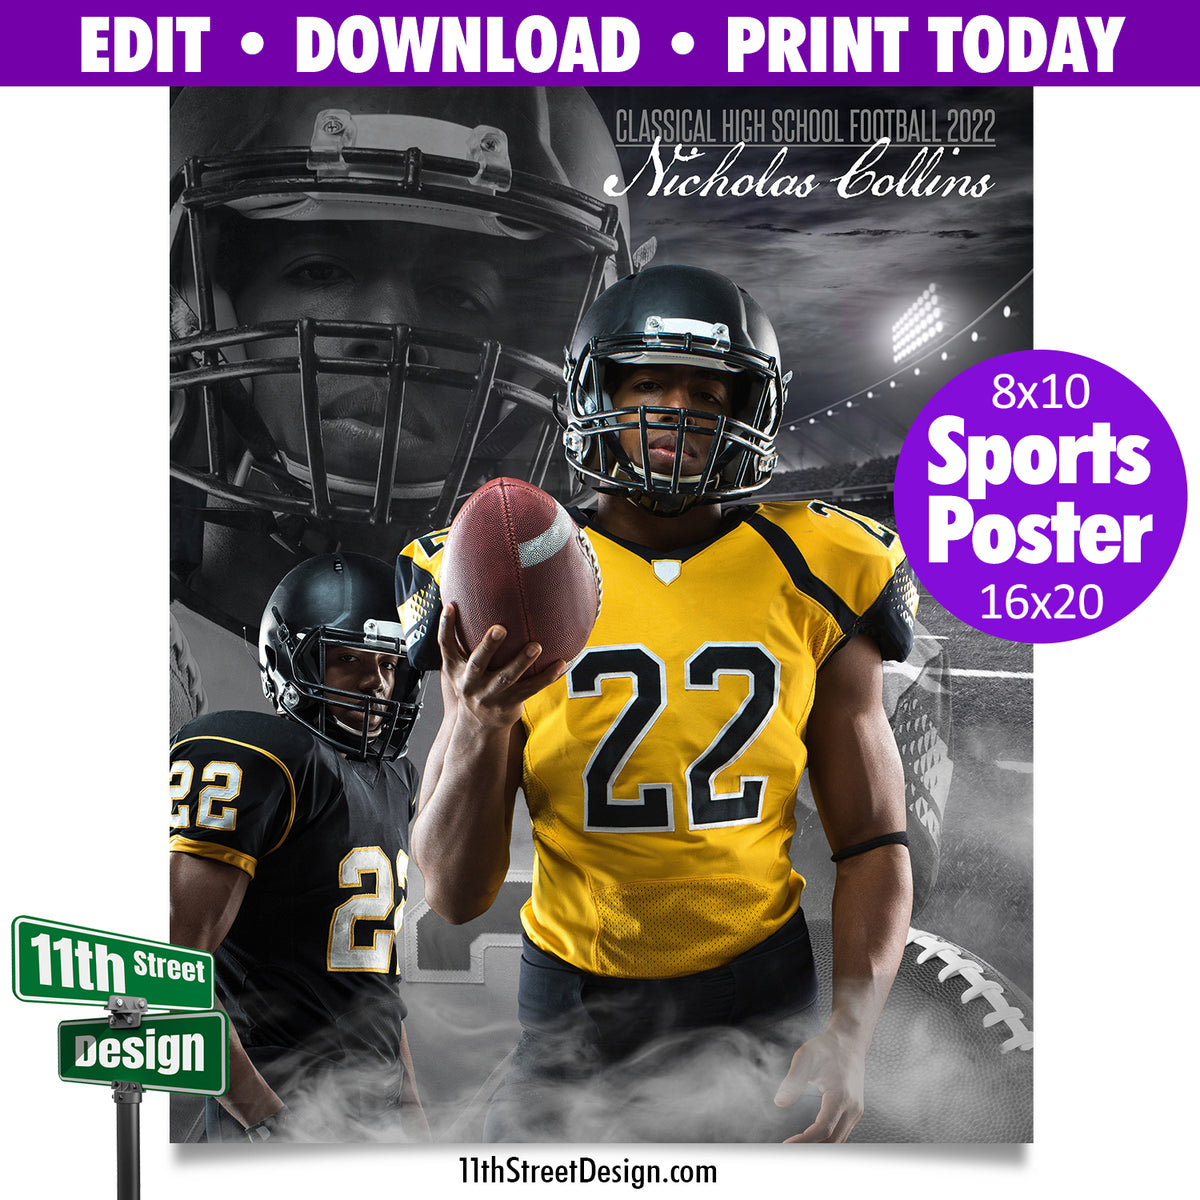 Sports Poster • Edit Now Online • Print Today • Digital Download • Custom Sports Photos • Senior Day Night Poster • Dream Weaver Football Template